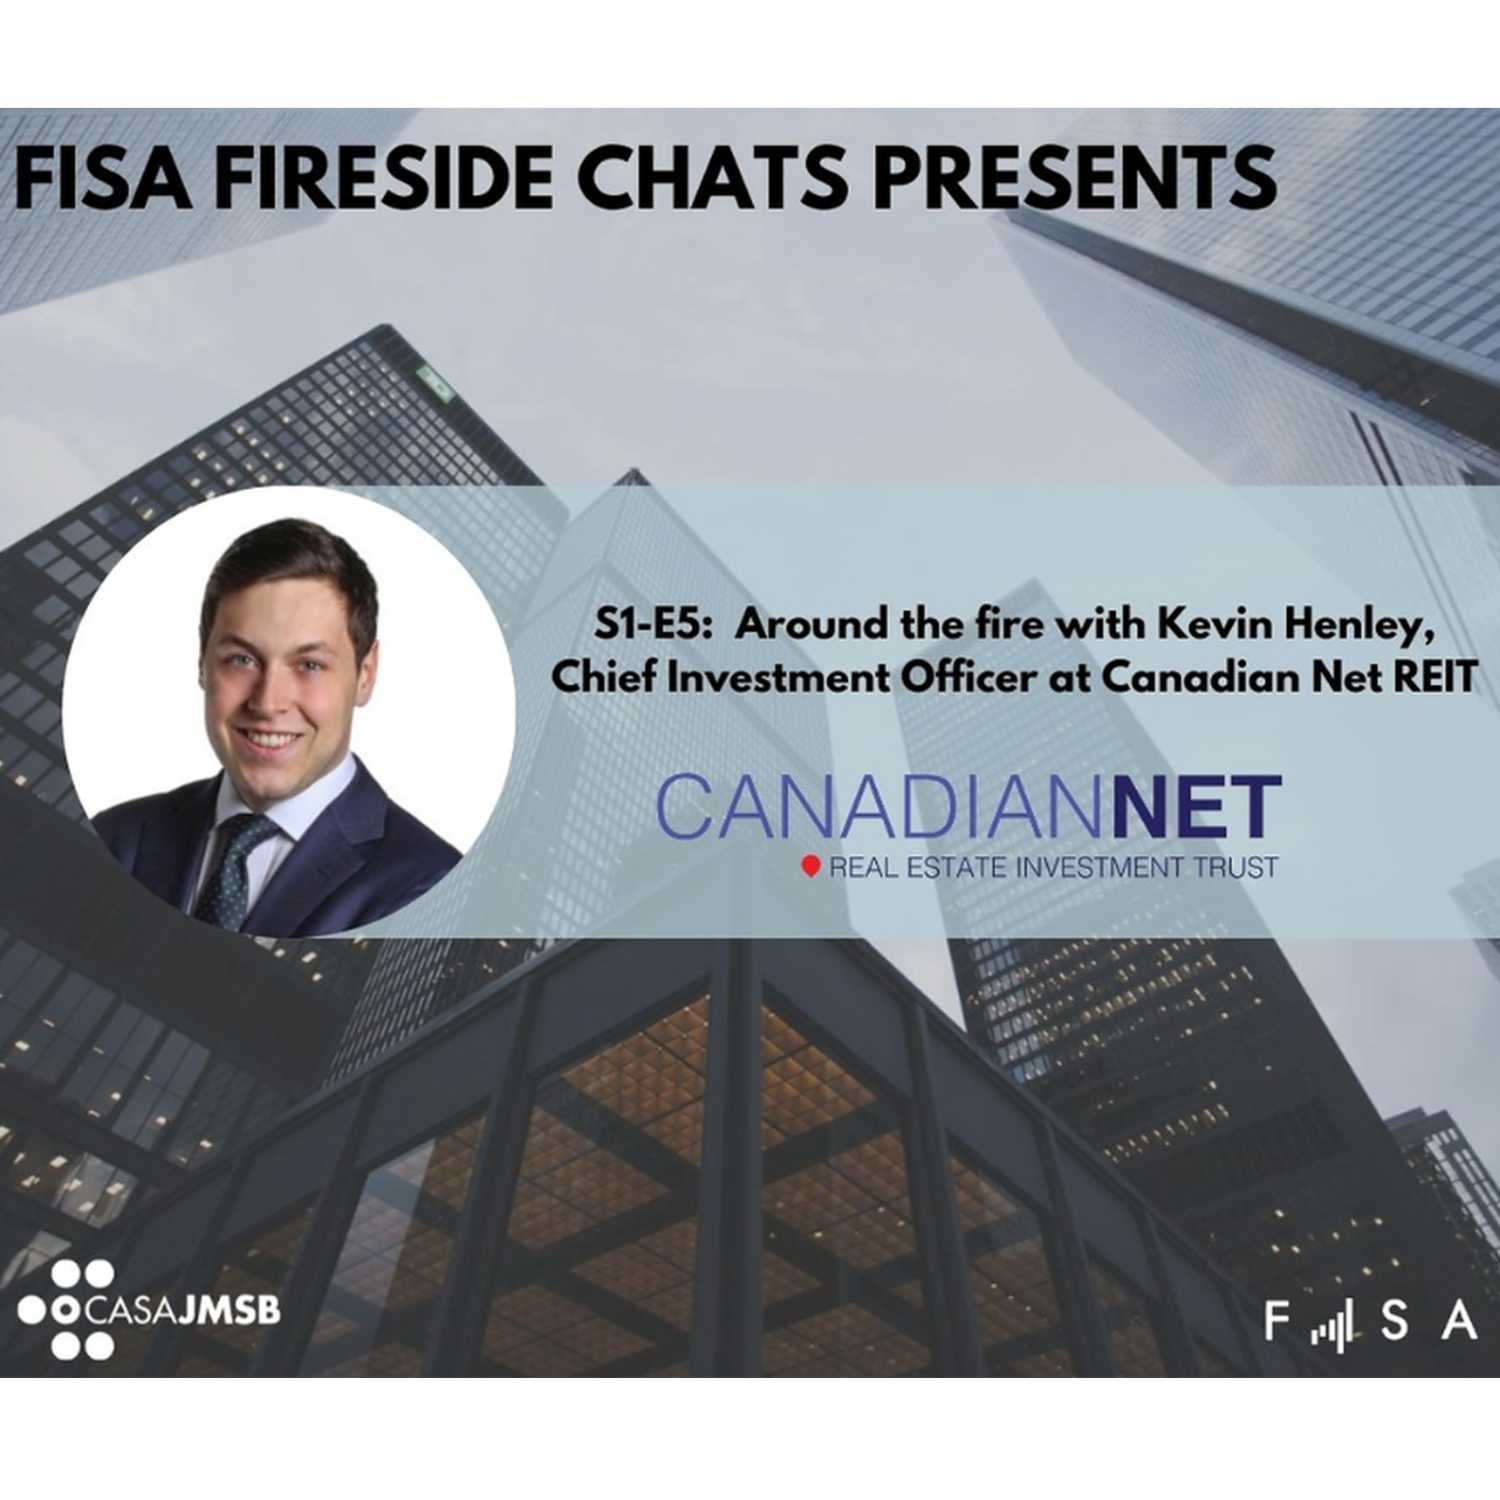 Around the fire with Kevin Henley, Chief Investment Officer at Canadian Net REIT